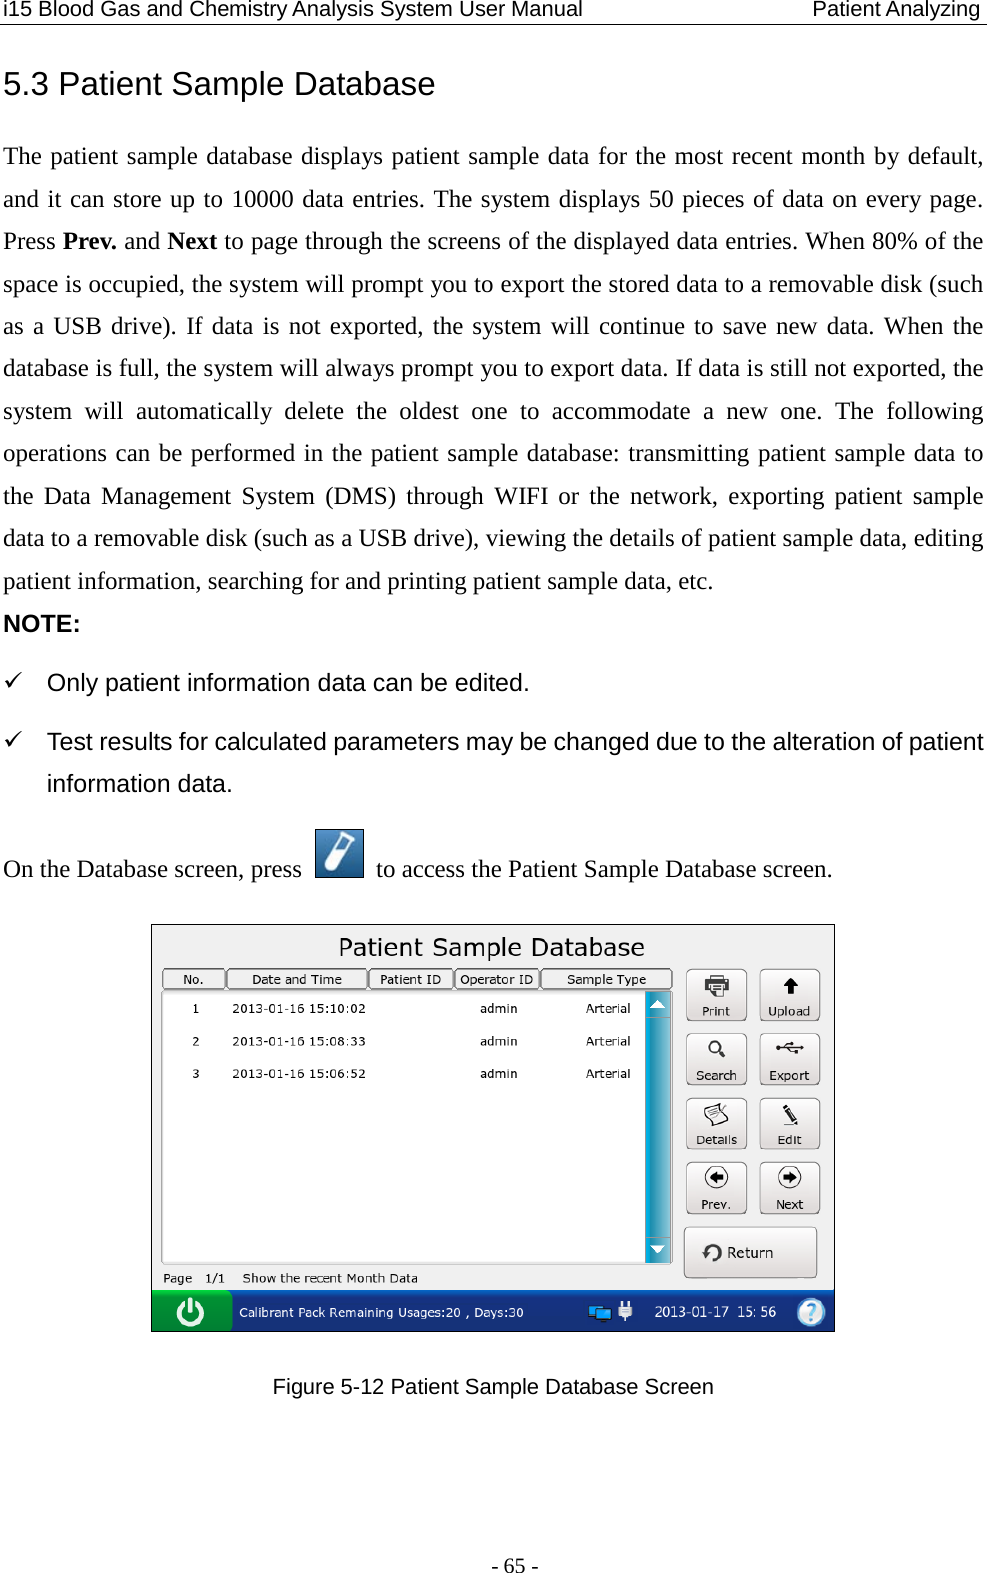 i15 Blood Gas and Chemistry Analysis System User Manual                            Patient Analyzing - 65 - 5.3 Patient Sample Database The patient sample database displays patient sample data for the most recent month by default, and it can store up to 10000 data entries. The system displays 50 pieces of data on every page. Press Prev. and Next to page through the screens of the displayed data entries. When 80% of the space is occupied, the system will prompt you to export the stored data to a removable disk (such as a USB drive). If data is not exported, the system will continue to save new data. When the database is full, the system will always prompt you to export data. If data is still not exported, the system will automatically delete the oldest one to accommodate a new one.  The following operations can be performed in the patient sample database: transmitting patient sample data to the  Data Management System (DMS)  through WIFI or the network, exporting  patient sample data to a removable disk (such as a USB drive), viewing the details of patient sample data, editing patient information, searching for and printing patient sample data, etc. NOTE:   Only patient information data can be edited.   Test results for calculated parameters may be changed due to the alteration of patient information data. On the Database screen, press   to access the Patient Sample Database screen.  Figure 5-12 Patient Sample Database Screen  